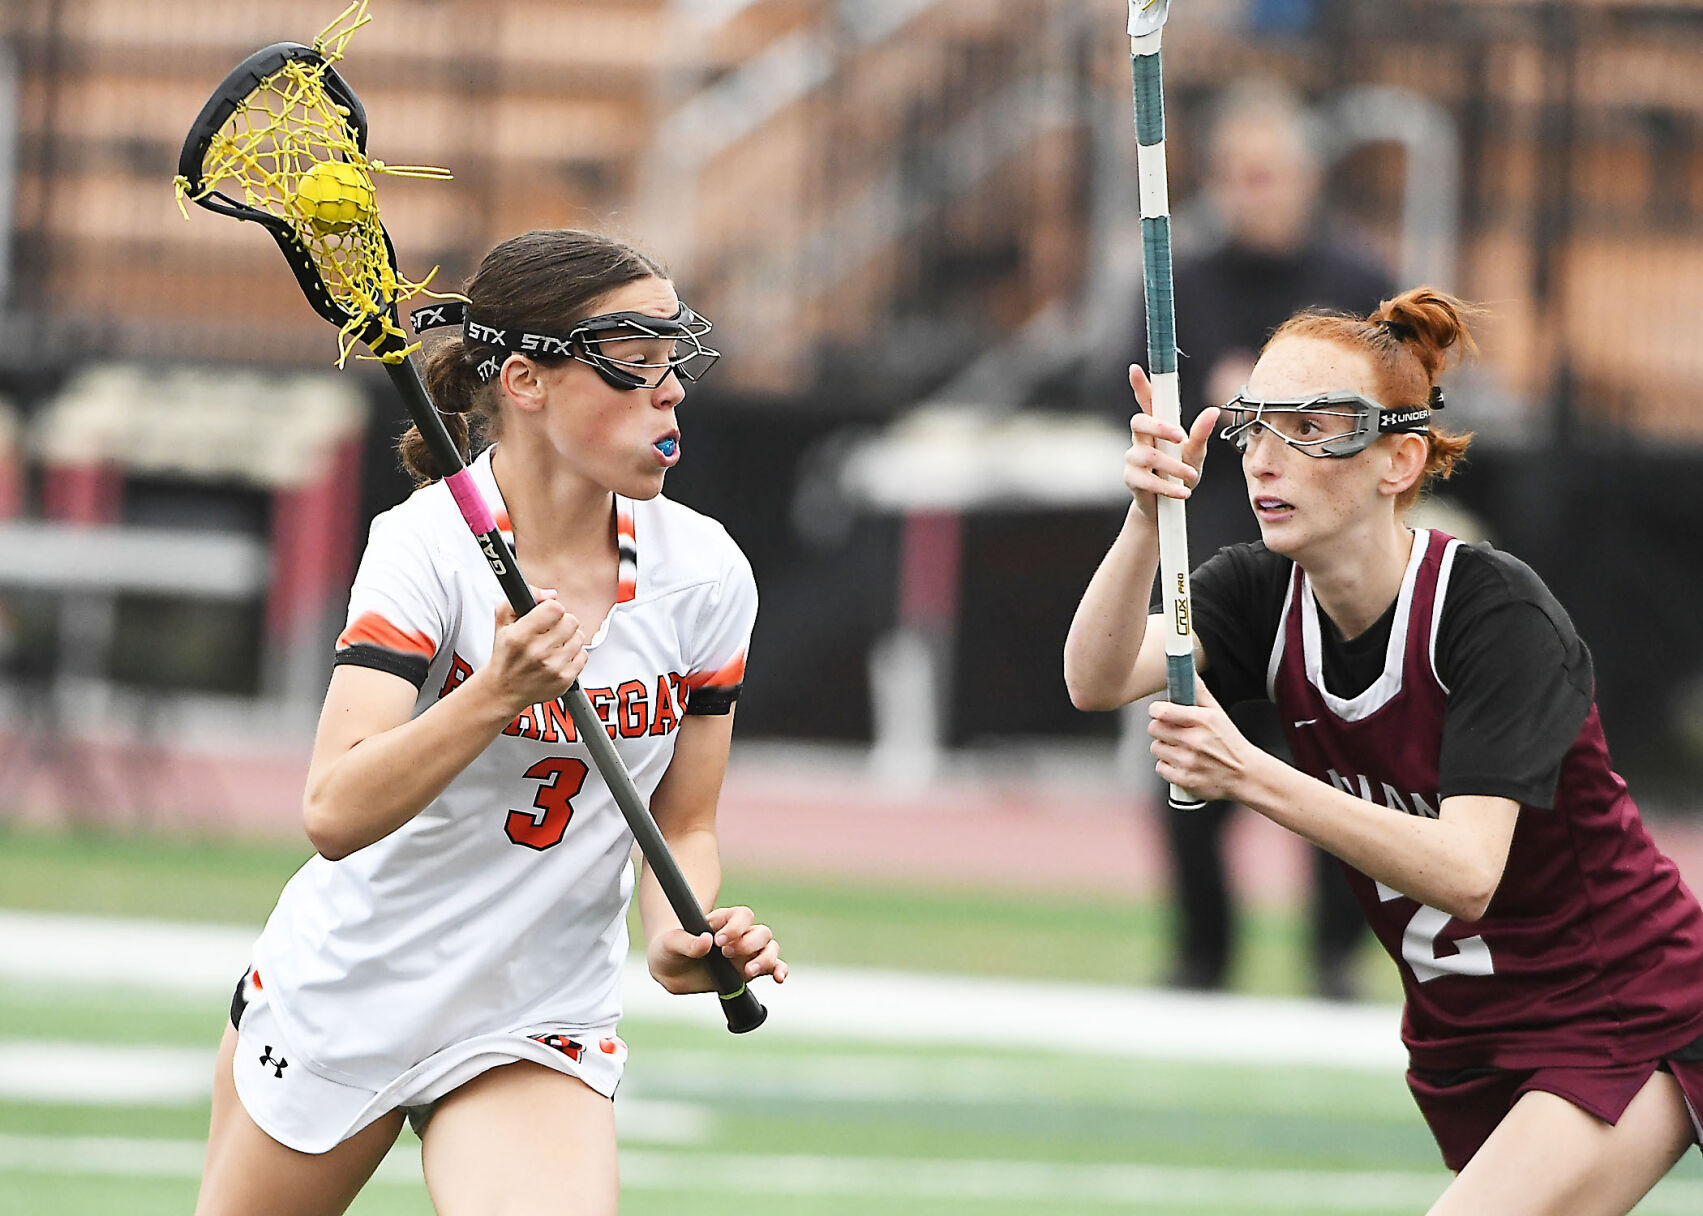 Alyson Sojak Dominates with 9 Goals in Barnegat’s Win over Toms River South: Lacrosse Roundup